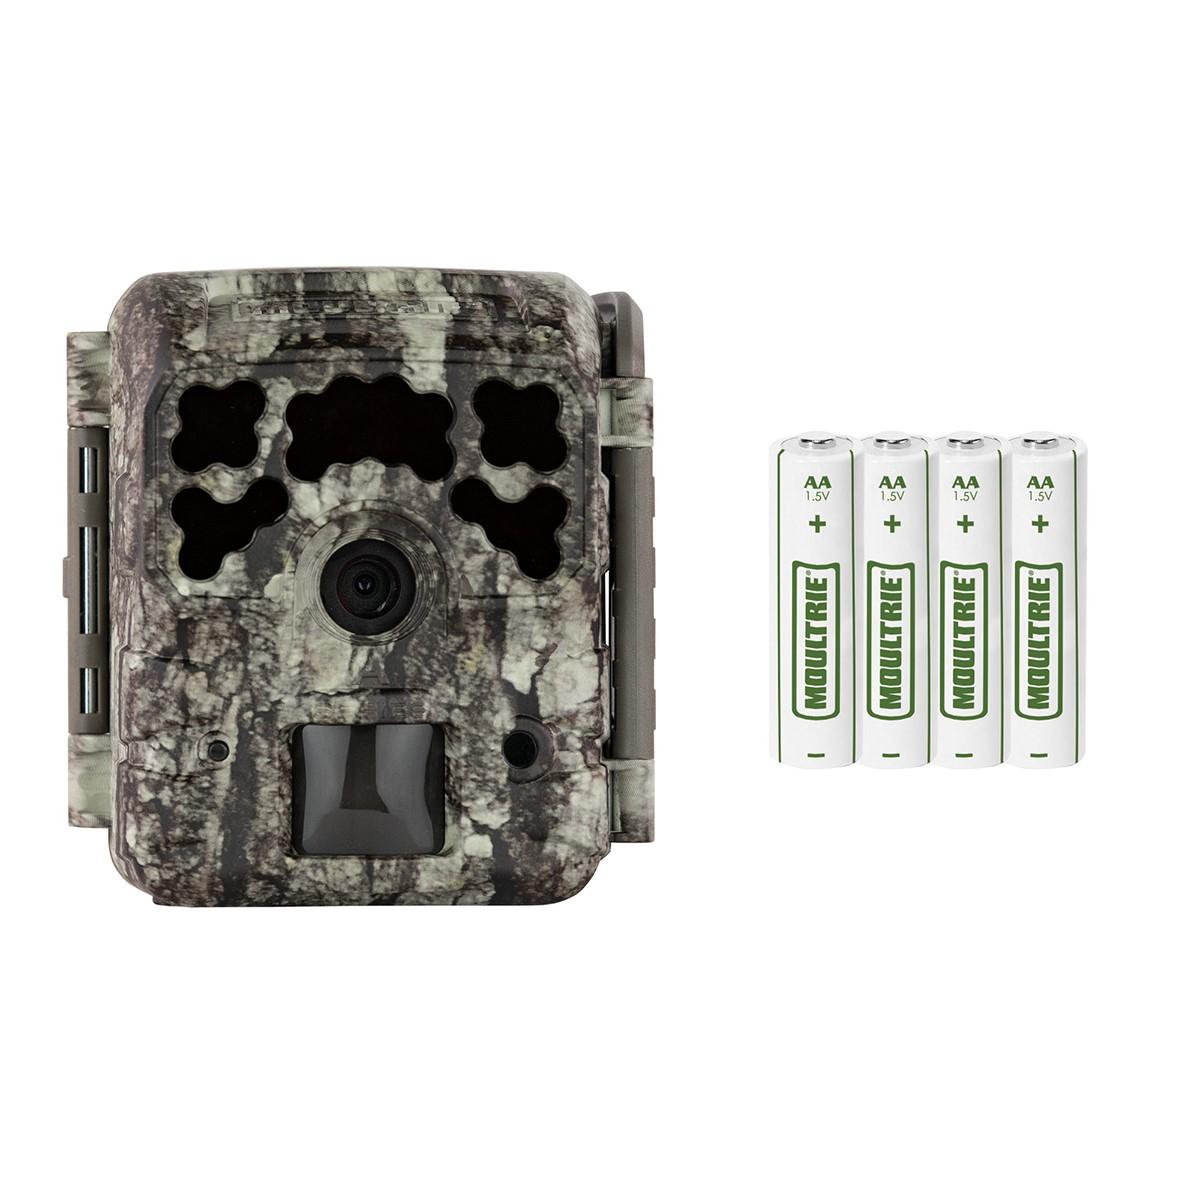 Moultrie MCG14059 Micro-42 Kit Moultrie White Bark 42MP Resolution MicroSD Card Slot/Up to 32GB Memory